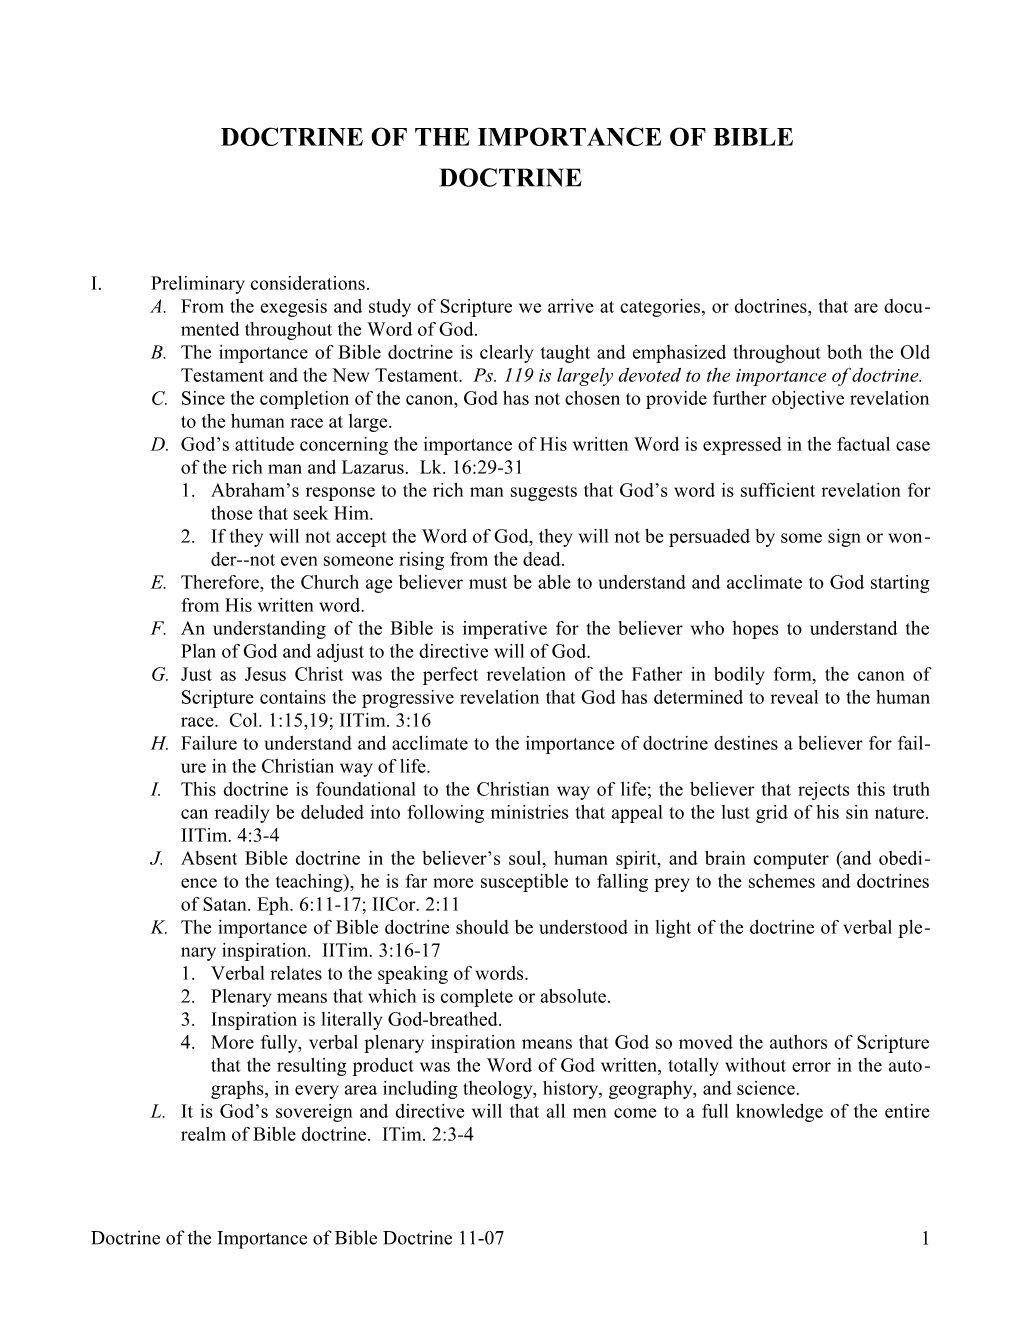 Doctrine of the Importance of Bible Doc-Trine